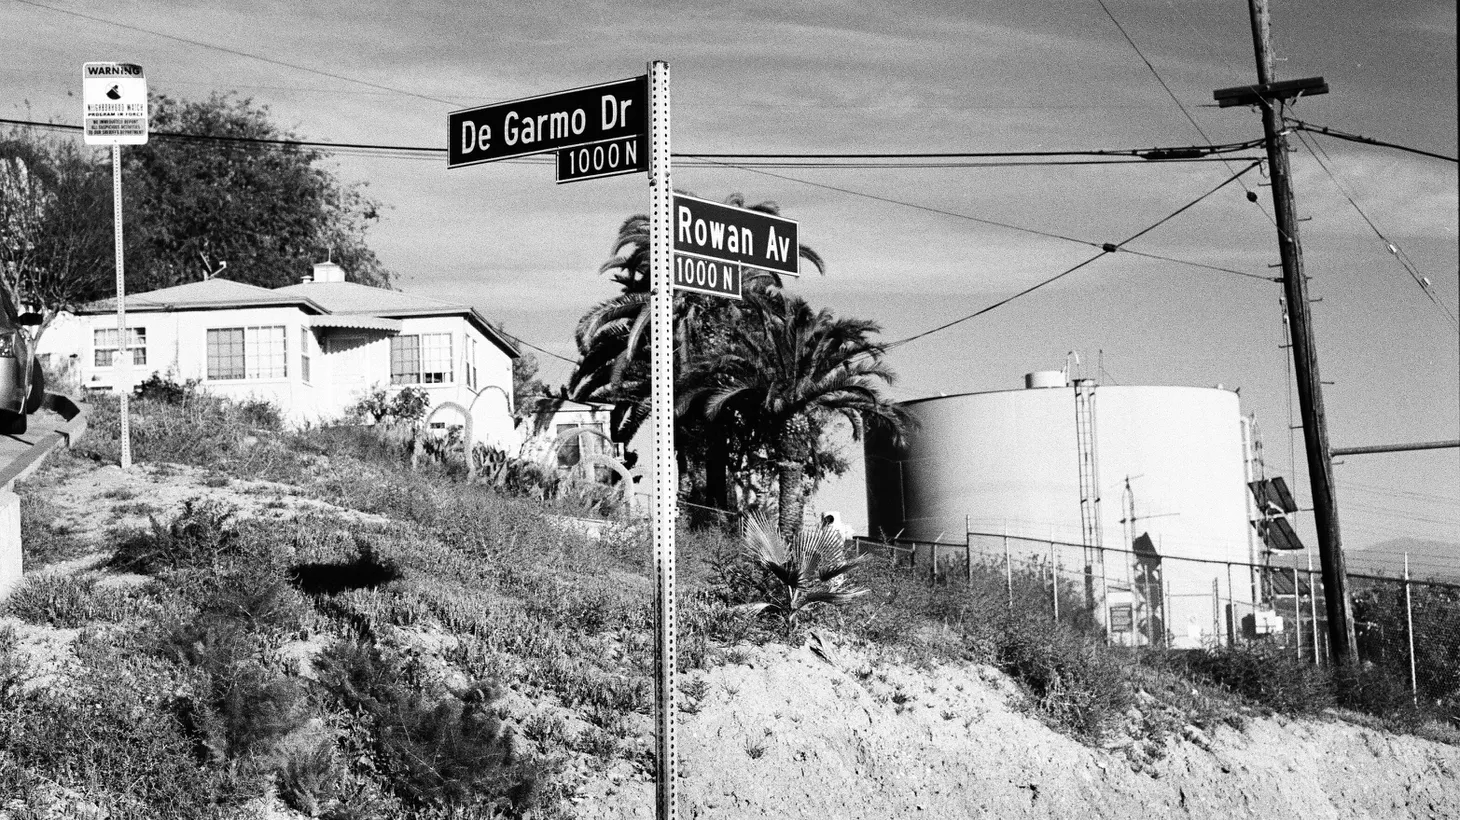 Writer Chester Himes lived at the corner of Rowan Ave. and De Garmo Dr., City Terrace, East Los Angeles from 1942-1945.